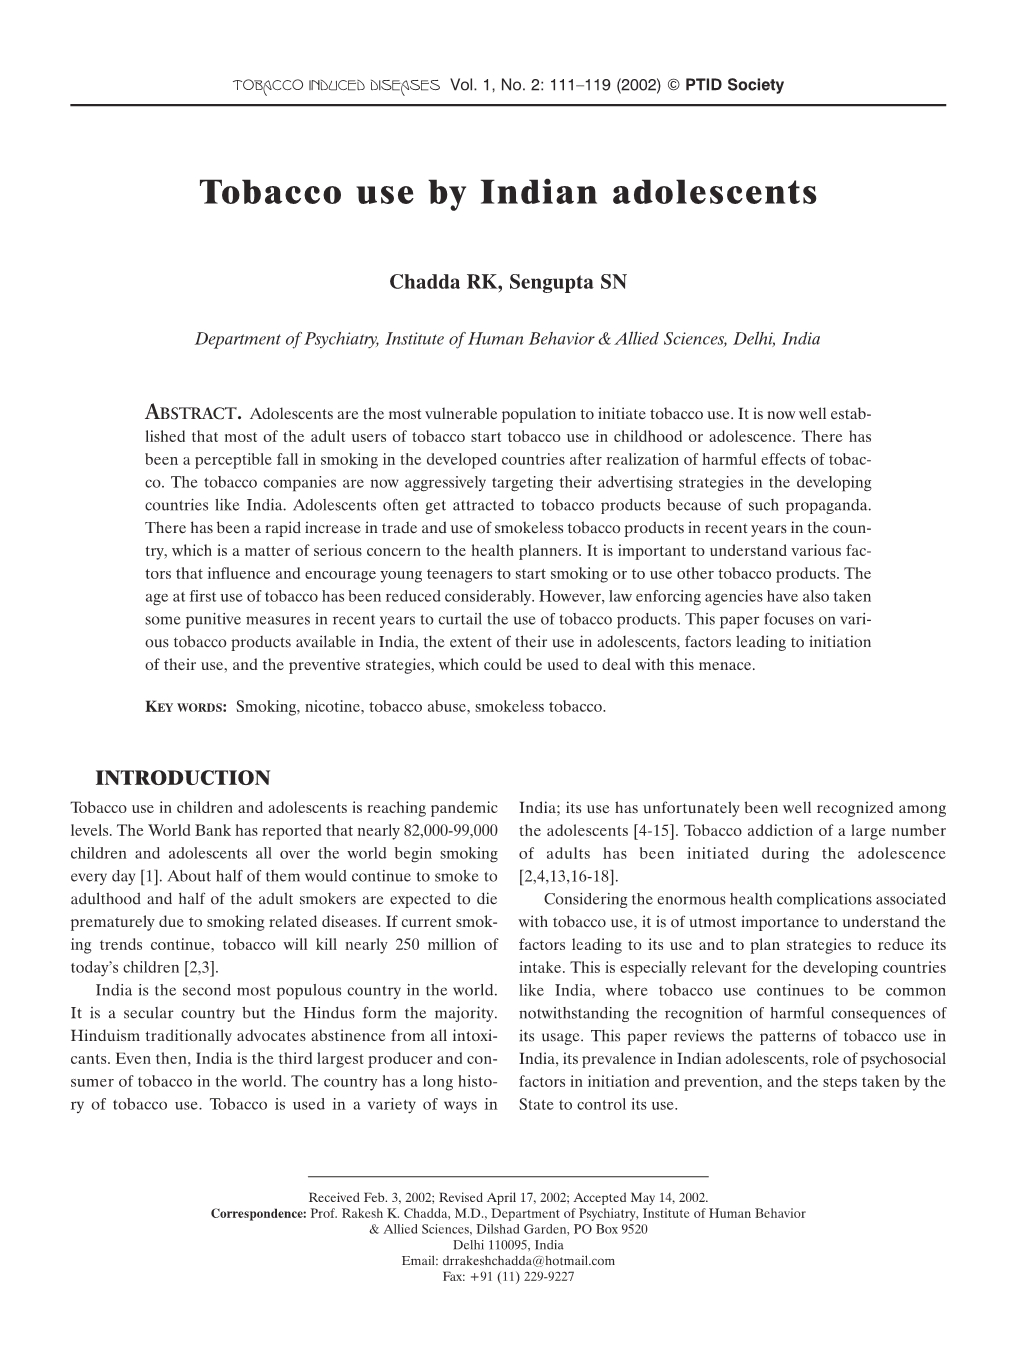 Tobacco Use by Indian Adolescents